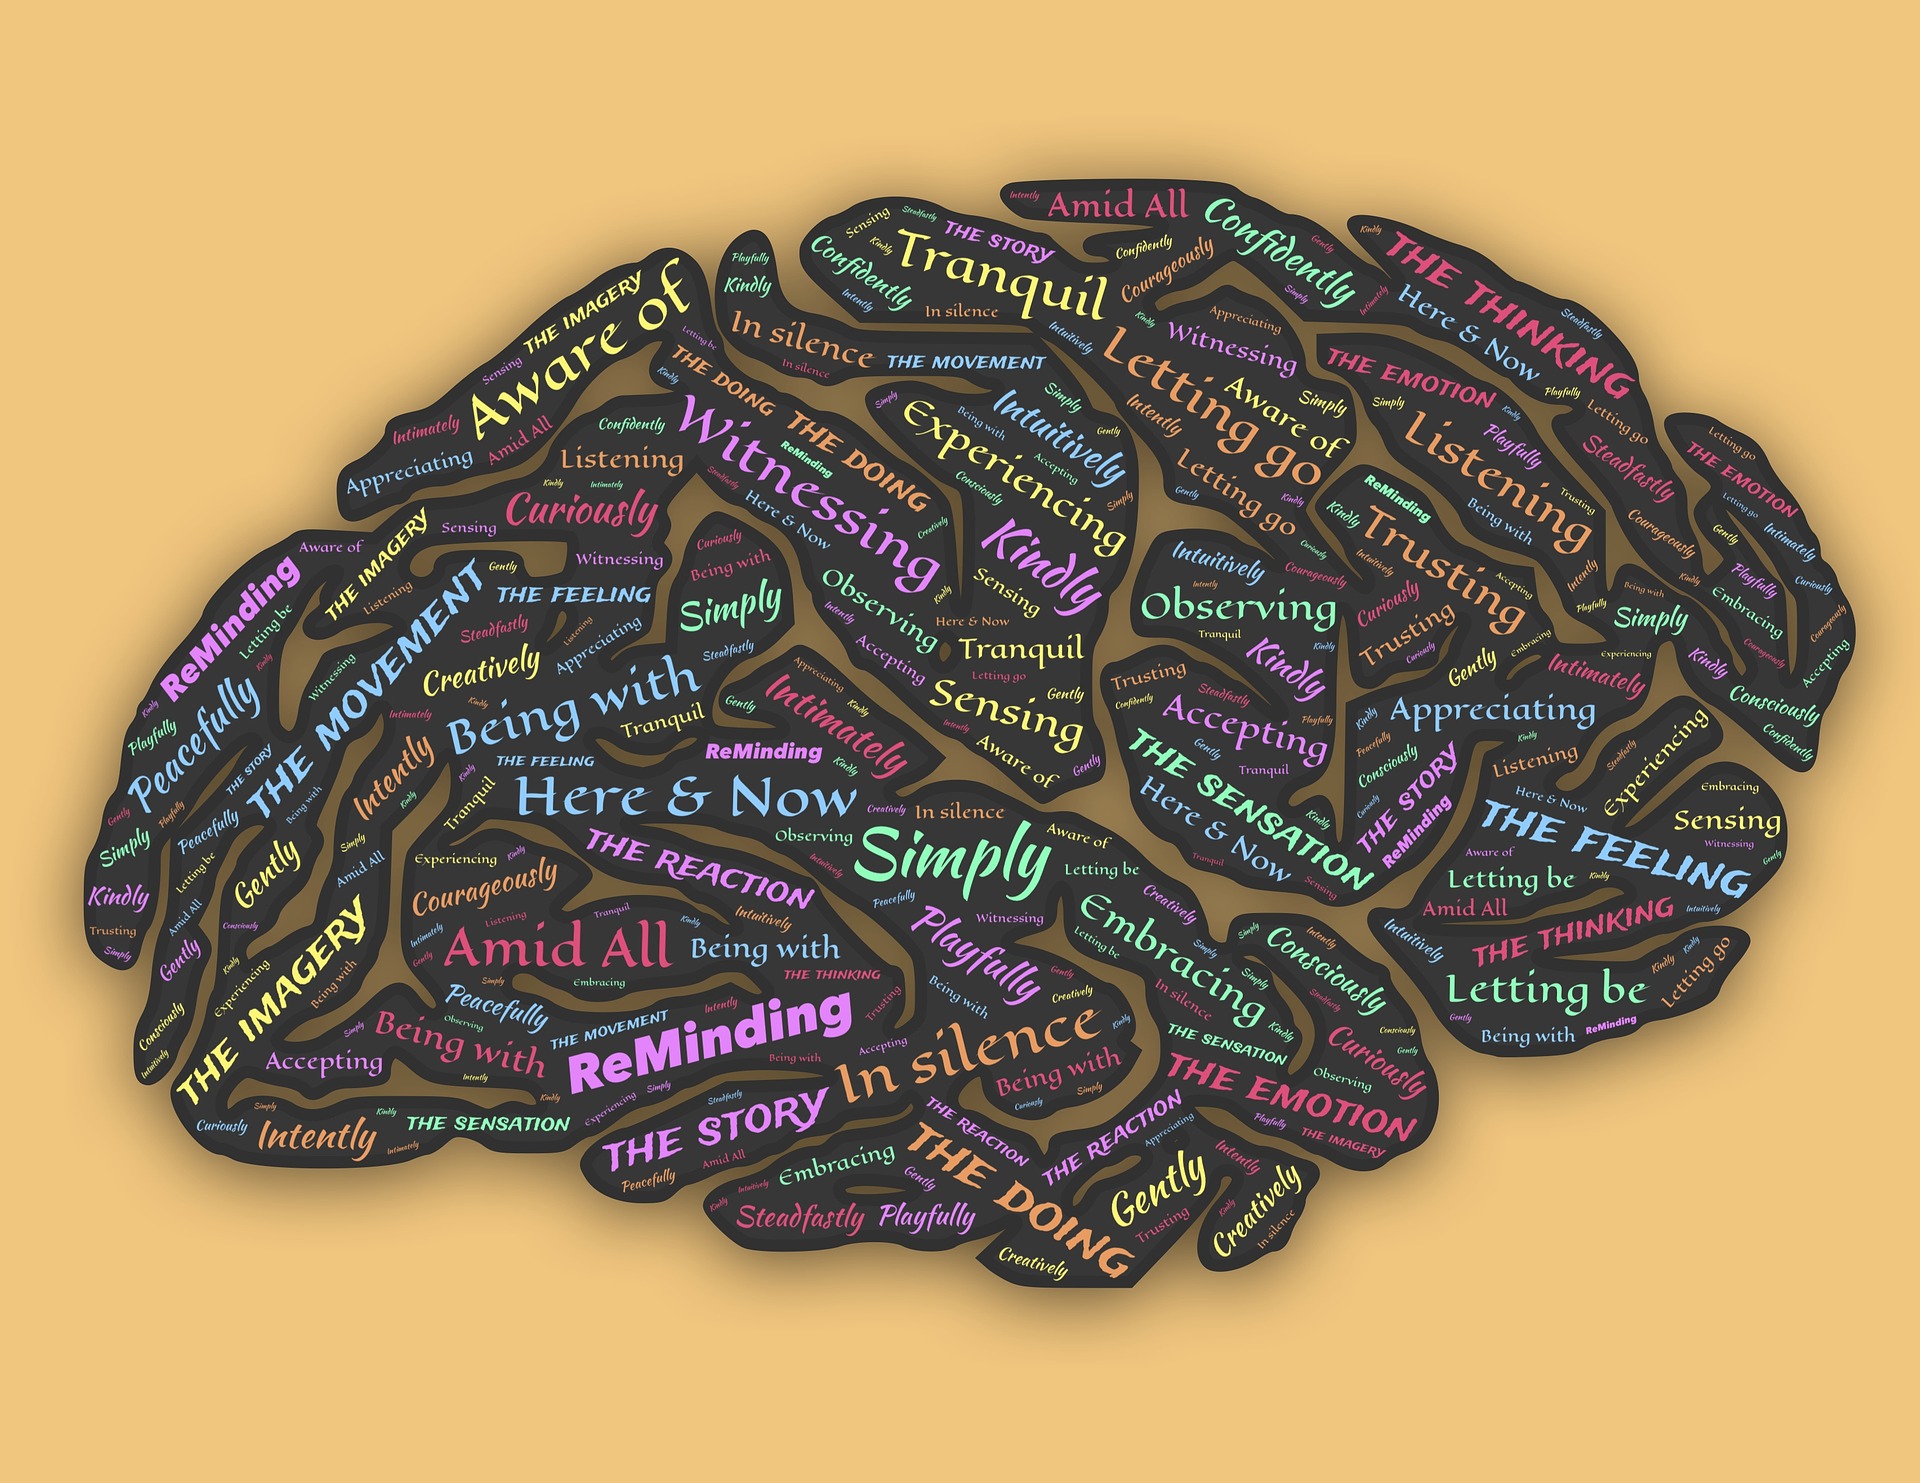 Illustrative image of a brain marked with emotional and intuitive words